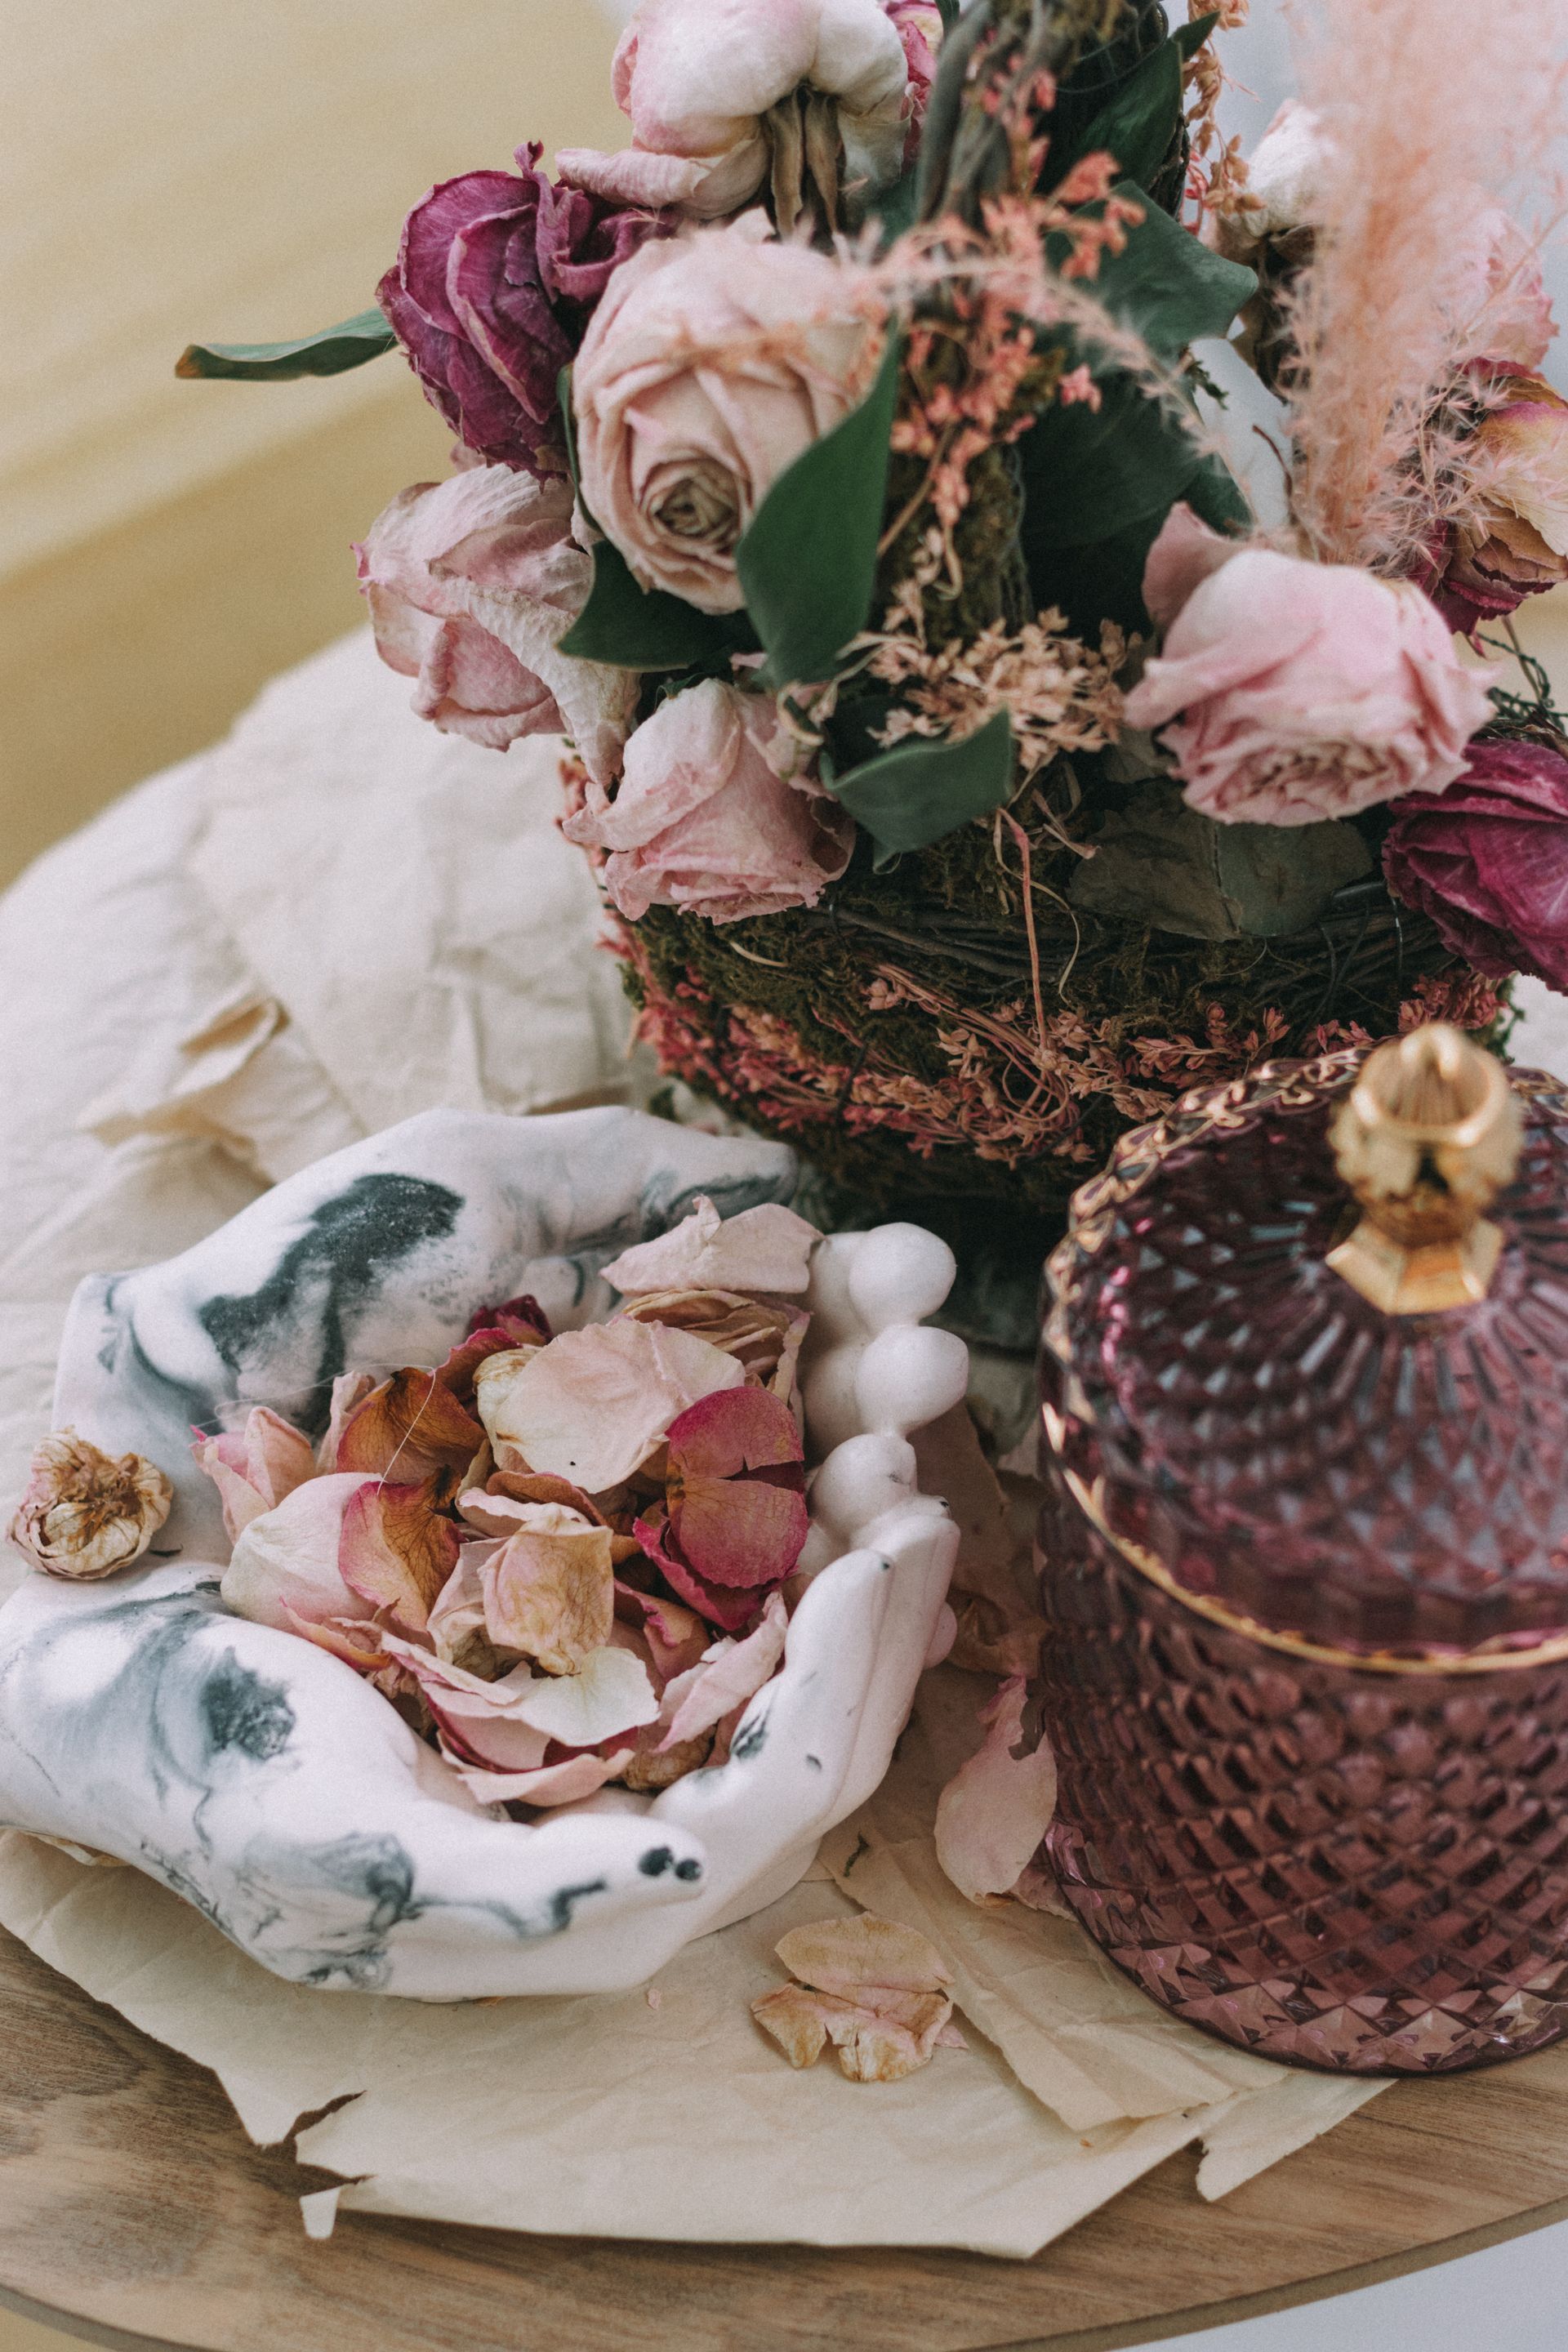 Potpourri sits in a hands-shaped bowl near a dried flower bouquet